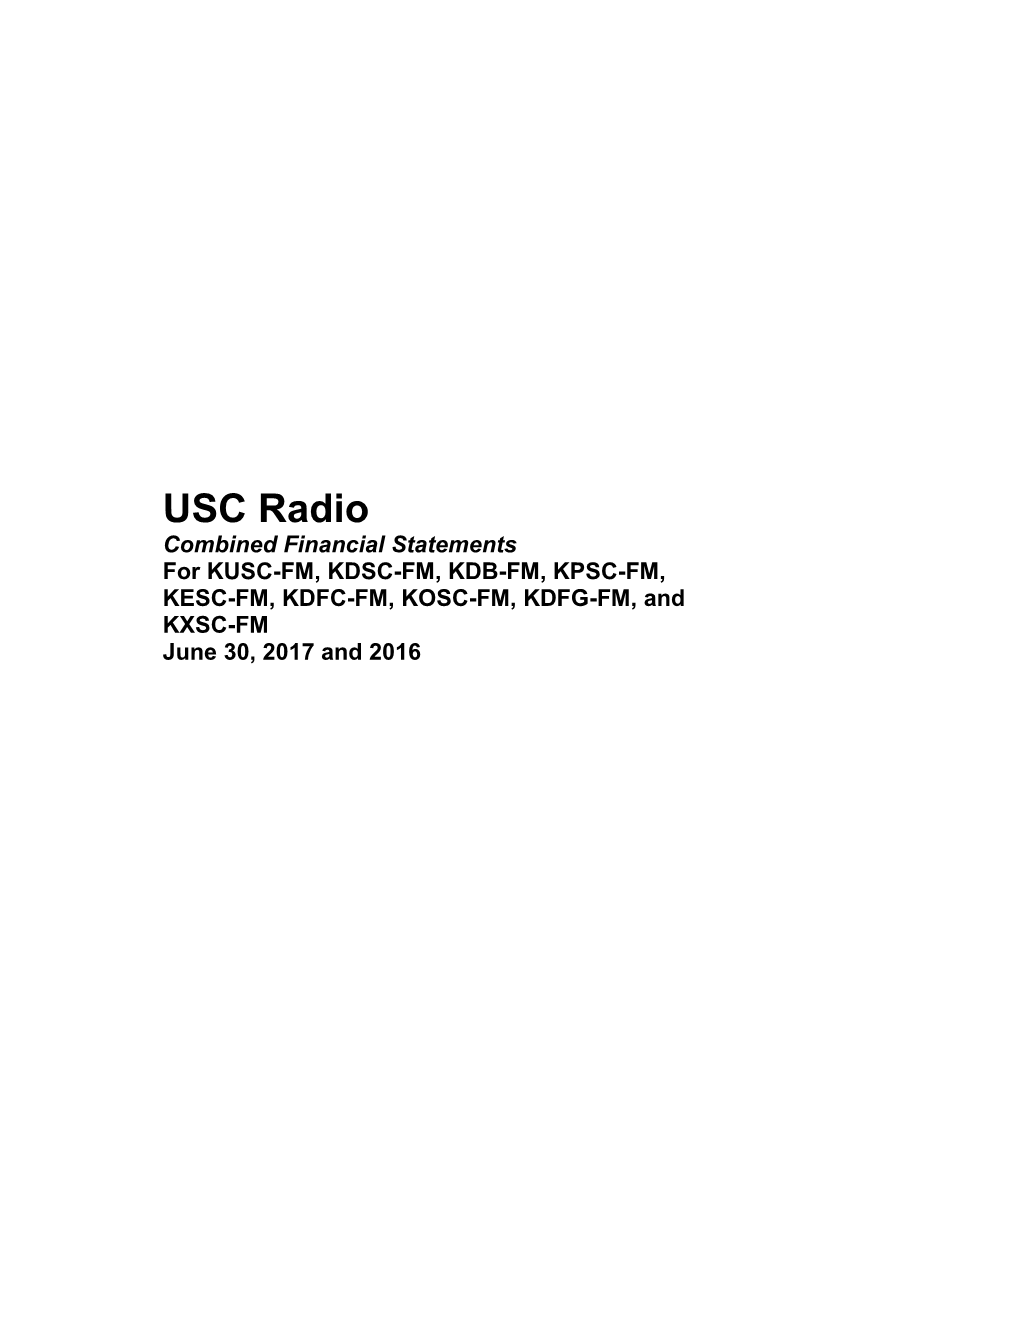 USC Radio Combined Financial Statements for KUSC-FM, KDSC-FM, KDB-FM, KPSC-FM, KESC-FM, KDFC-FM, KOSC-FM, KDFG-FM, and KXSC-FM June 30, 2017 and 2016